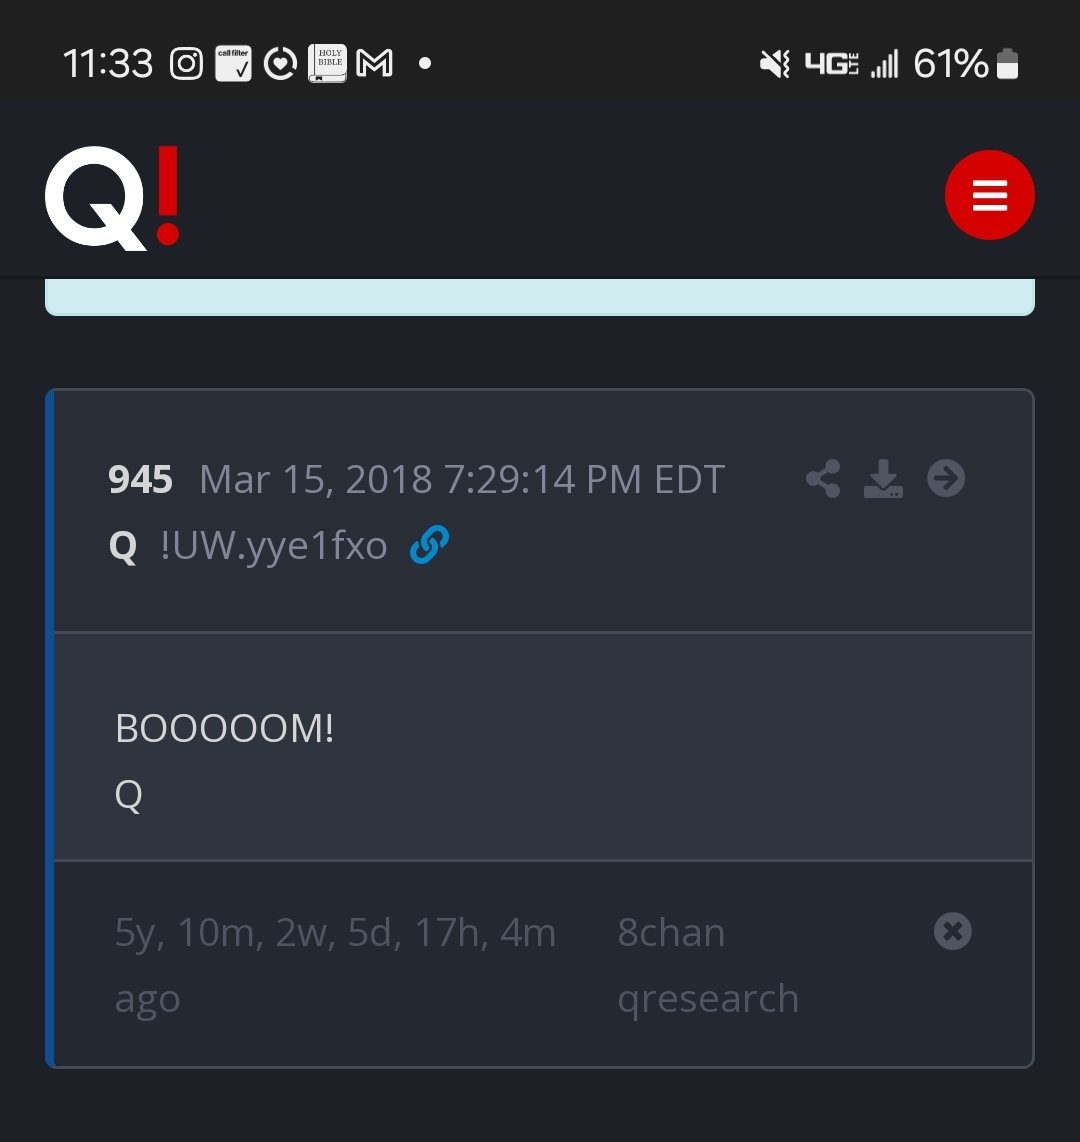 @5Never_Give_Up5 9:42>>9:45=5:5
Q942
Mar 10, 2018 9:15:05 PM EST
CNN airing assassination of JFK.
CNN 3 sec delay - speech.
CNN Jim’s finger on button ready to stop transmission.
These people are sick.
Q
Q945
Mar 15, 2018 7:29:14 PM EDT
BOOOOOM!
Q